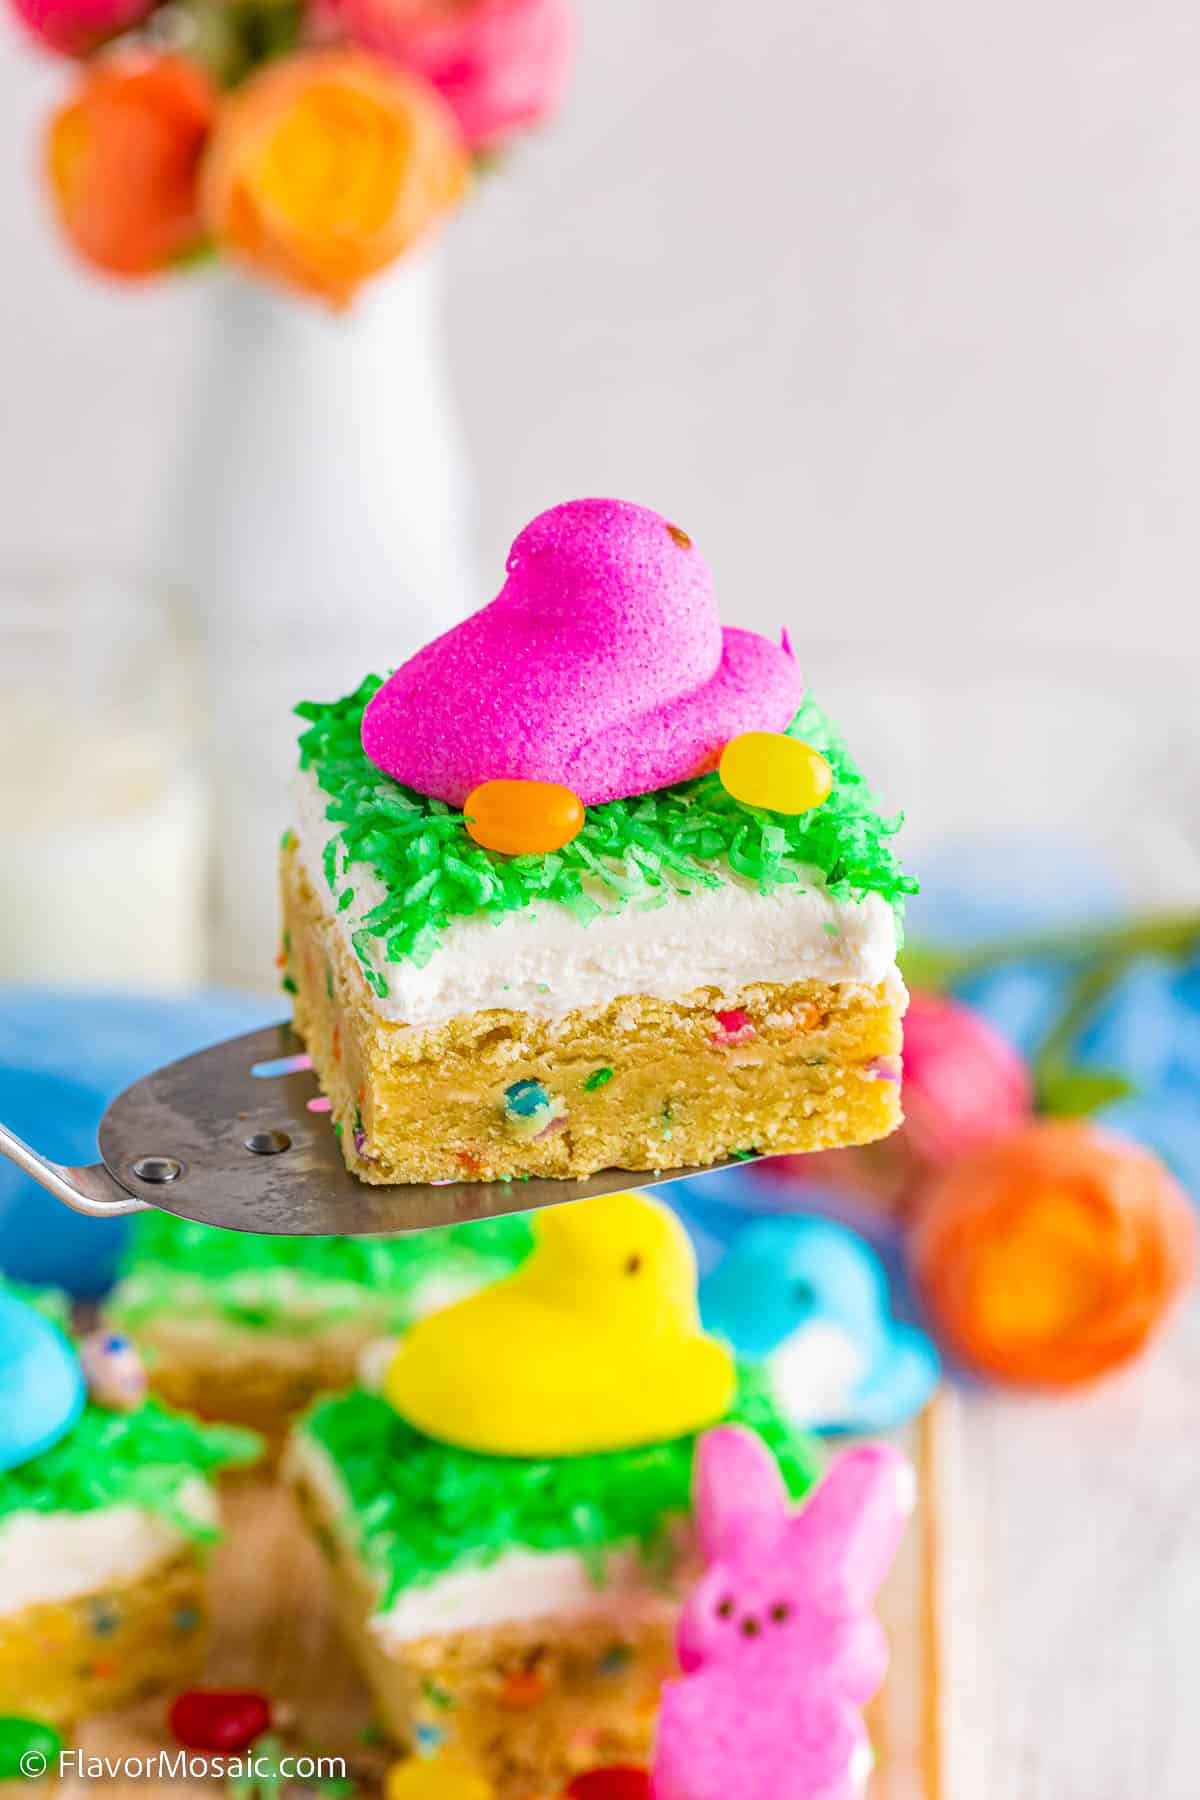 Side view of Easter Sugar Cookie Bar topped with Pink Easter Peep, 2 yellow jelly beans, and green colored shredded coconut held on a spatula above other Peep covered Easter Sugar Cookie Bars.